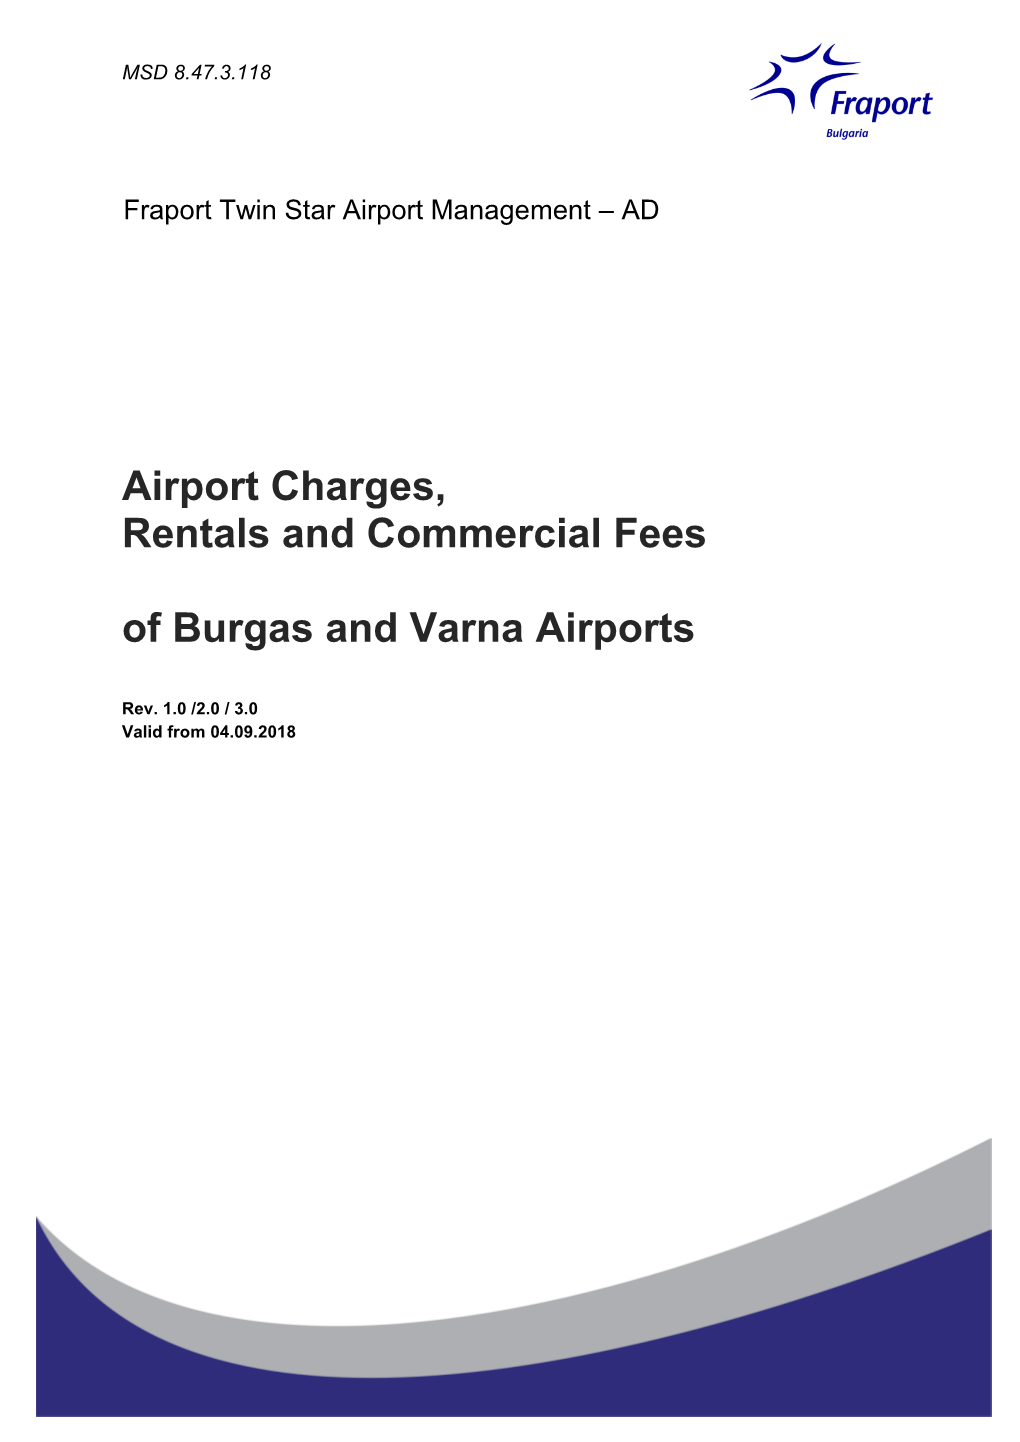 Airport Charges, Rentals and Commercial Fees of Burgas and Varna Airports